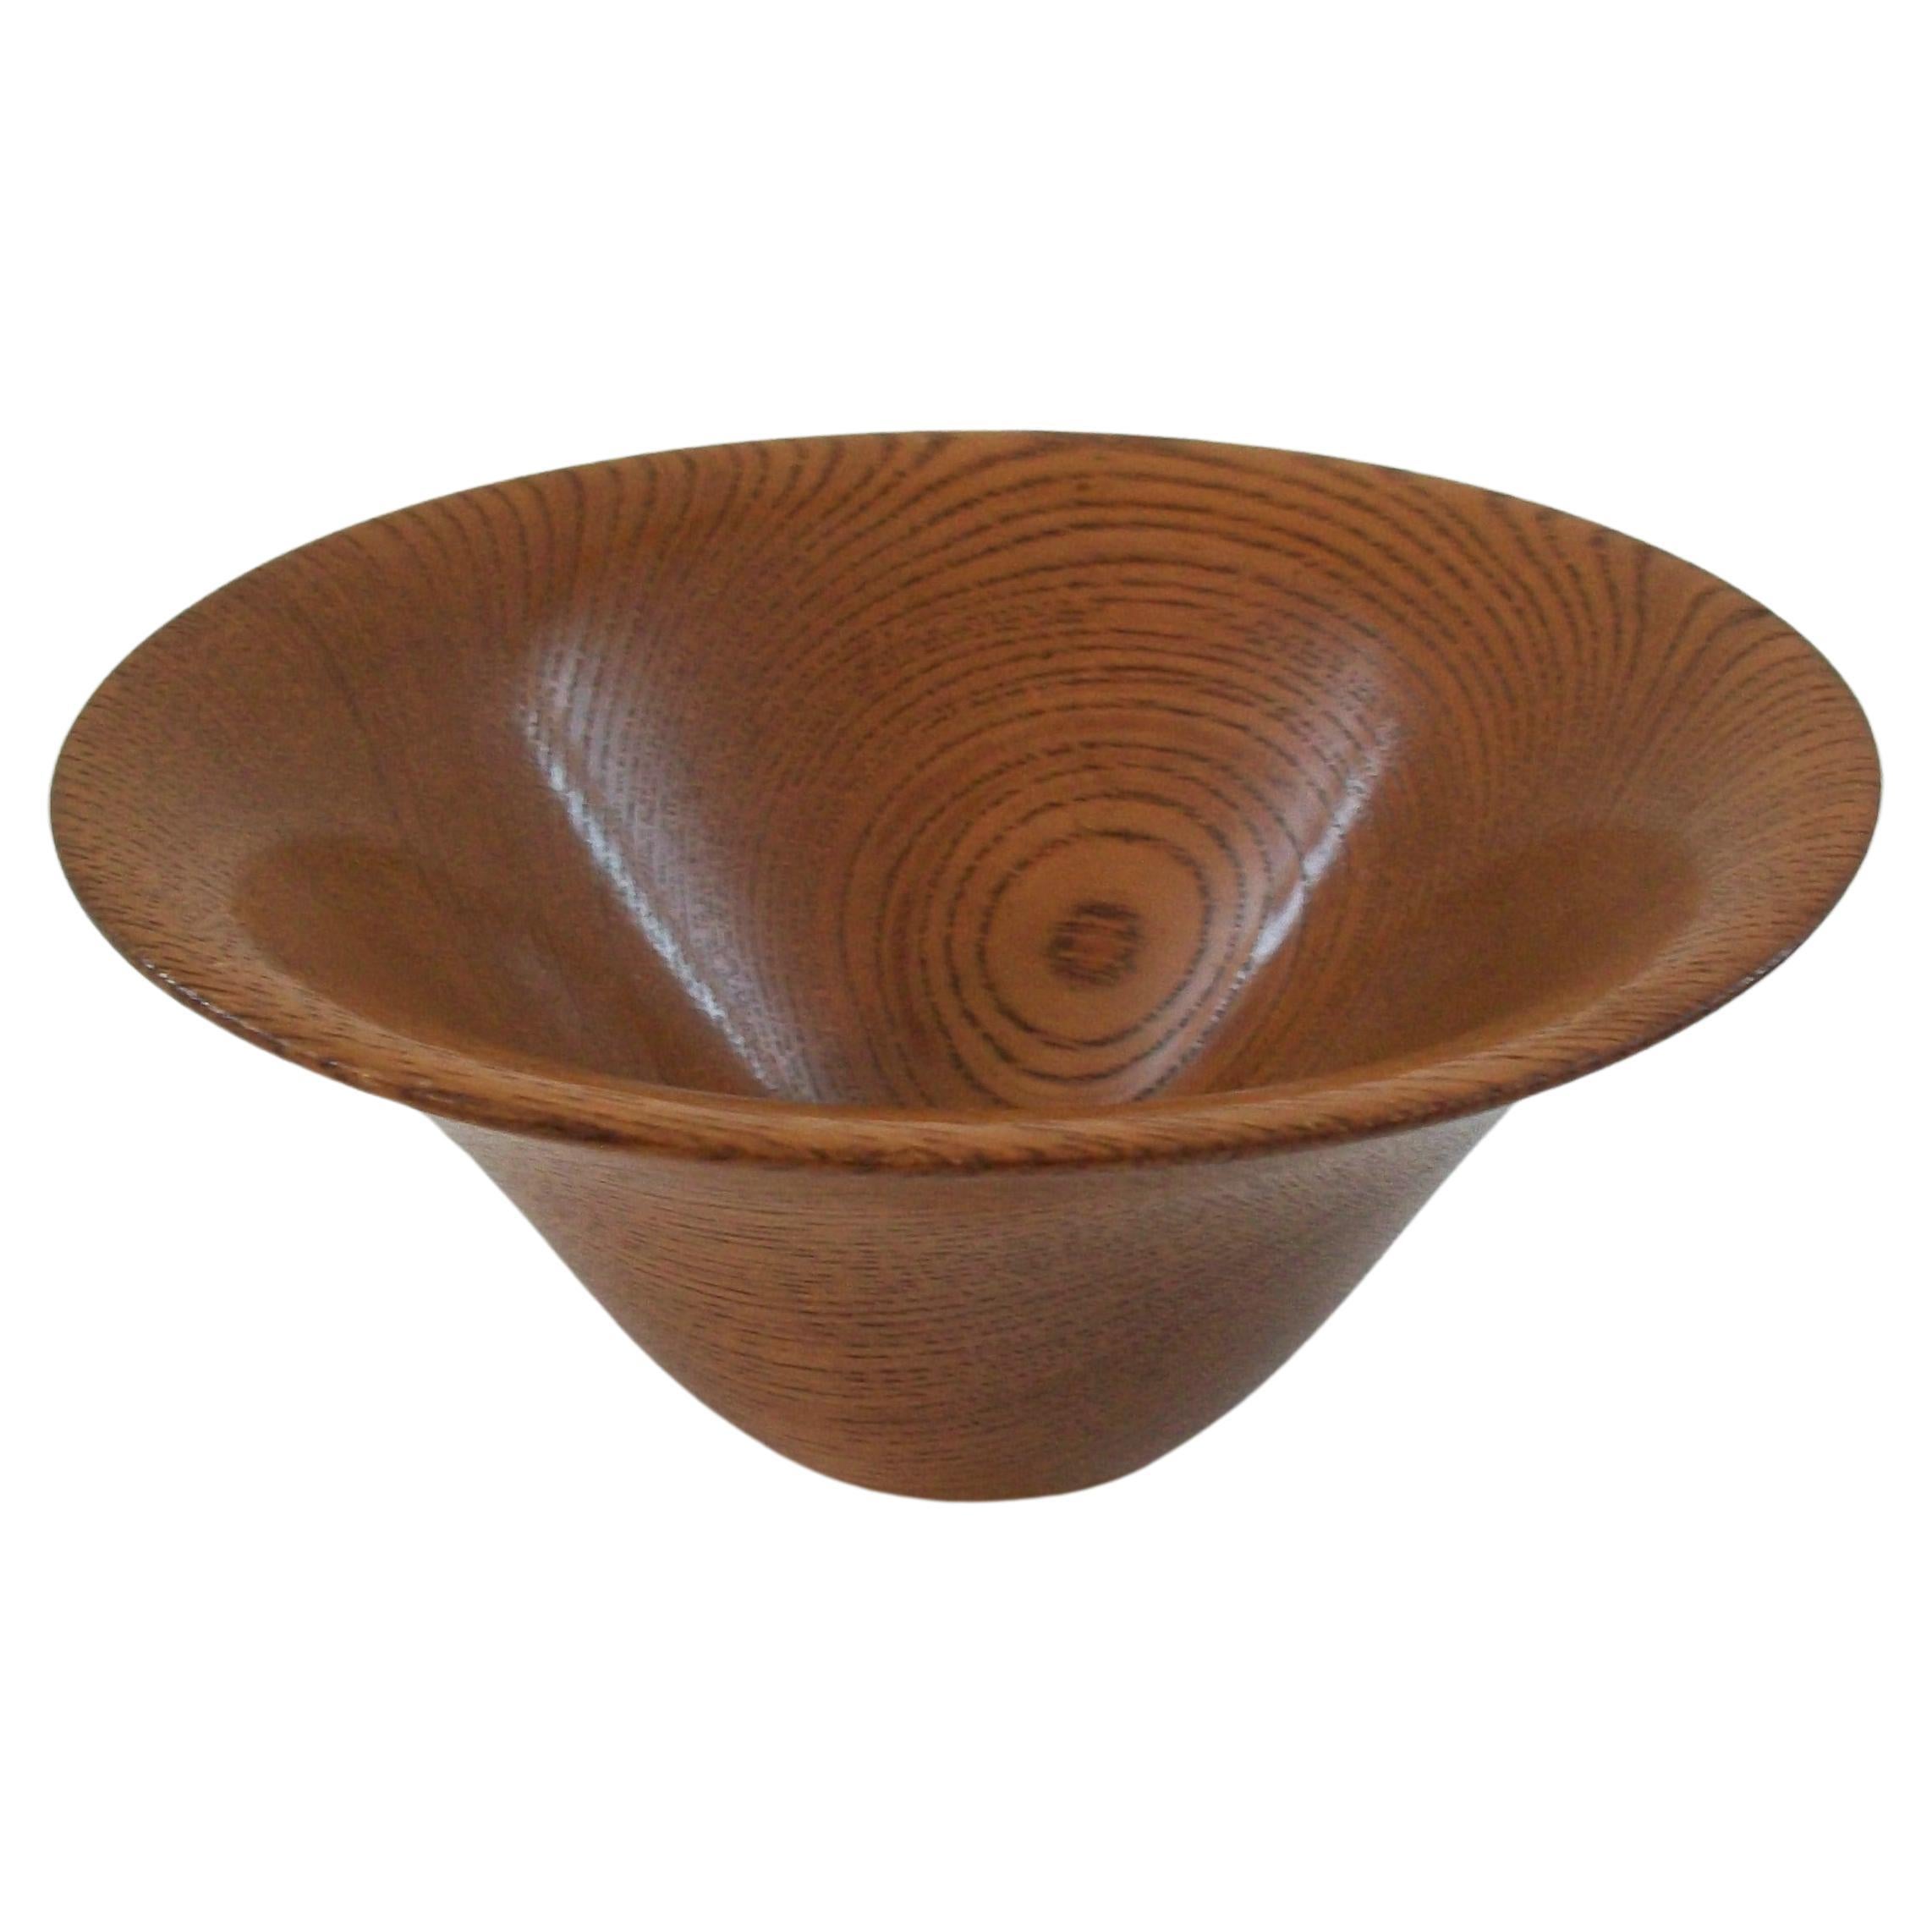 Mid Century Conical Teak Bowl - Small Size - Signed - Denmark - Circa 1960's For Sale